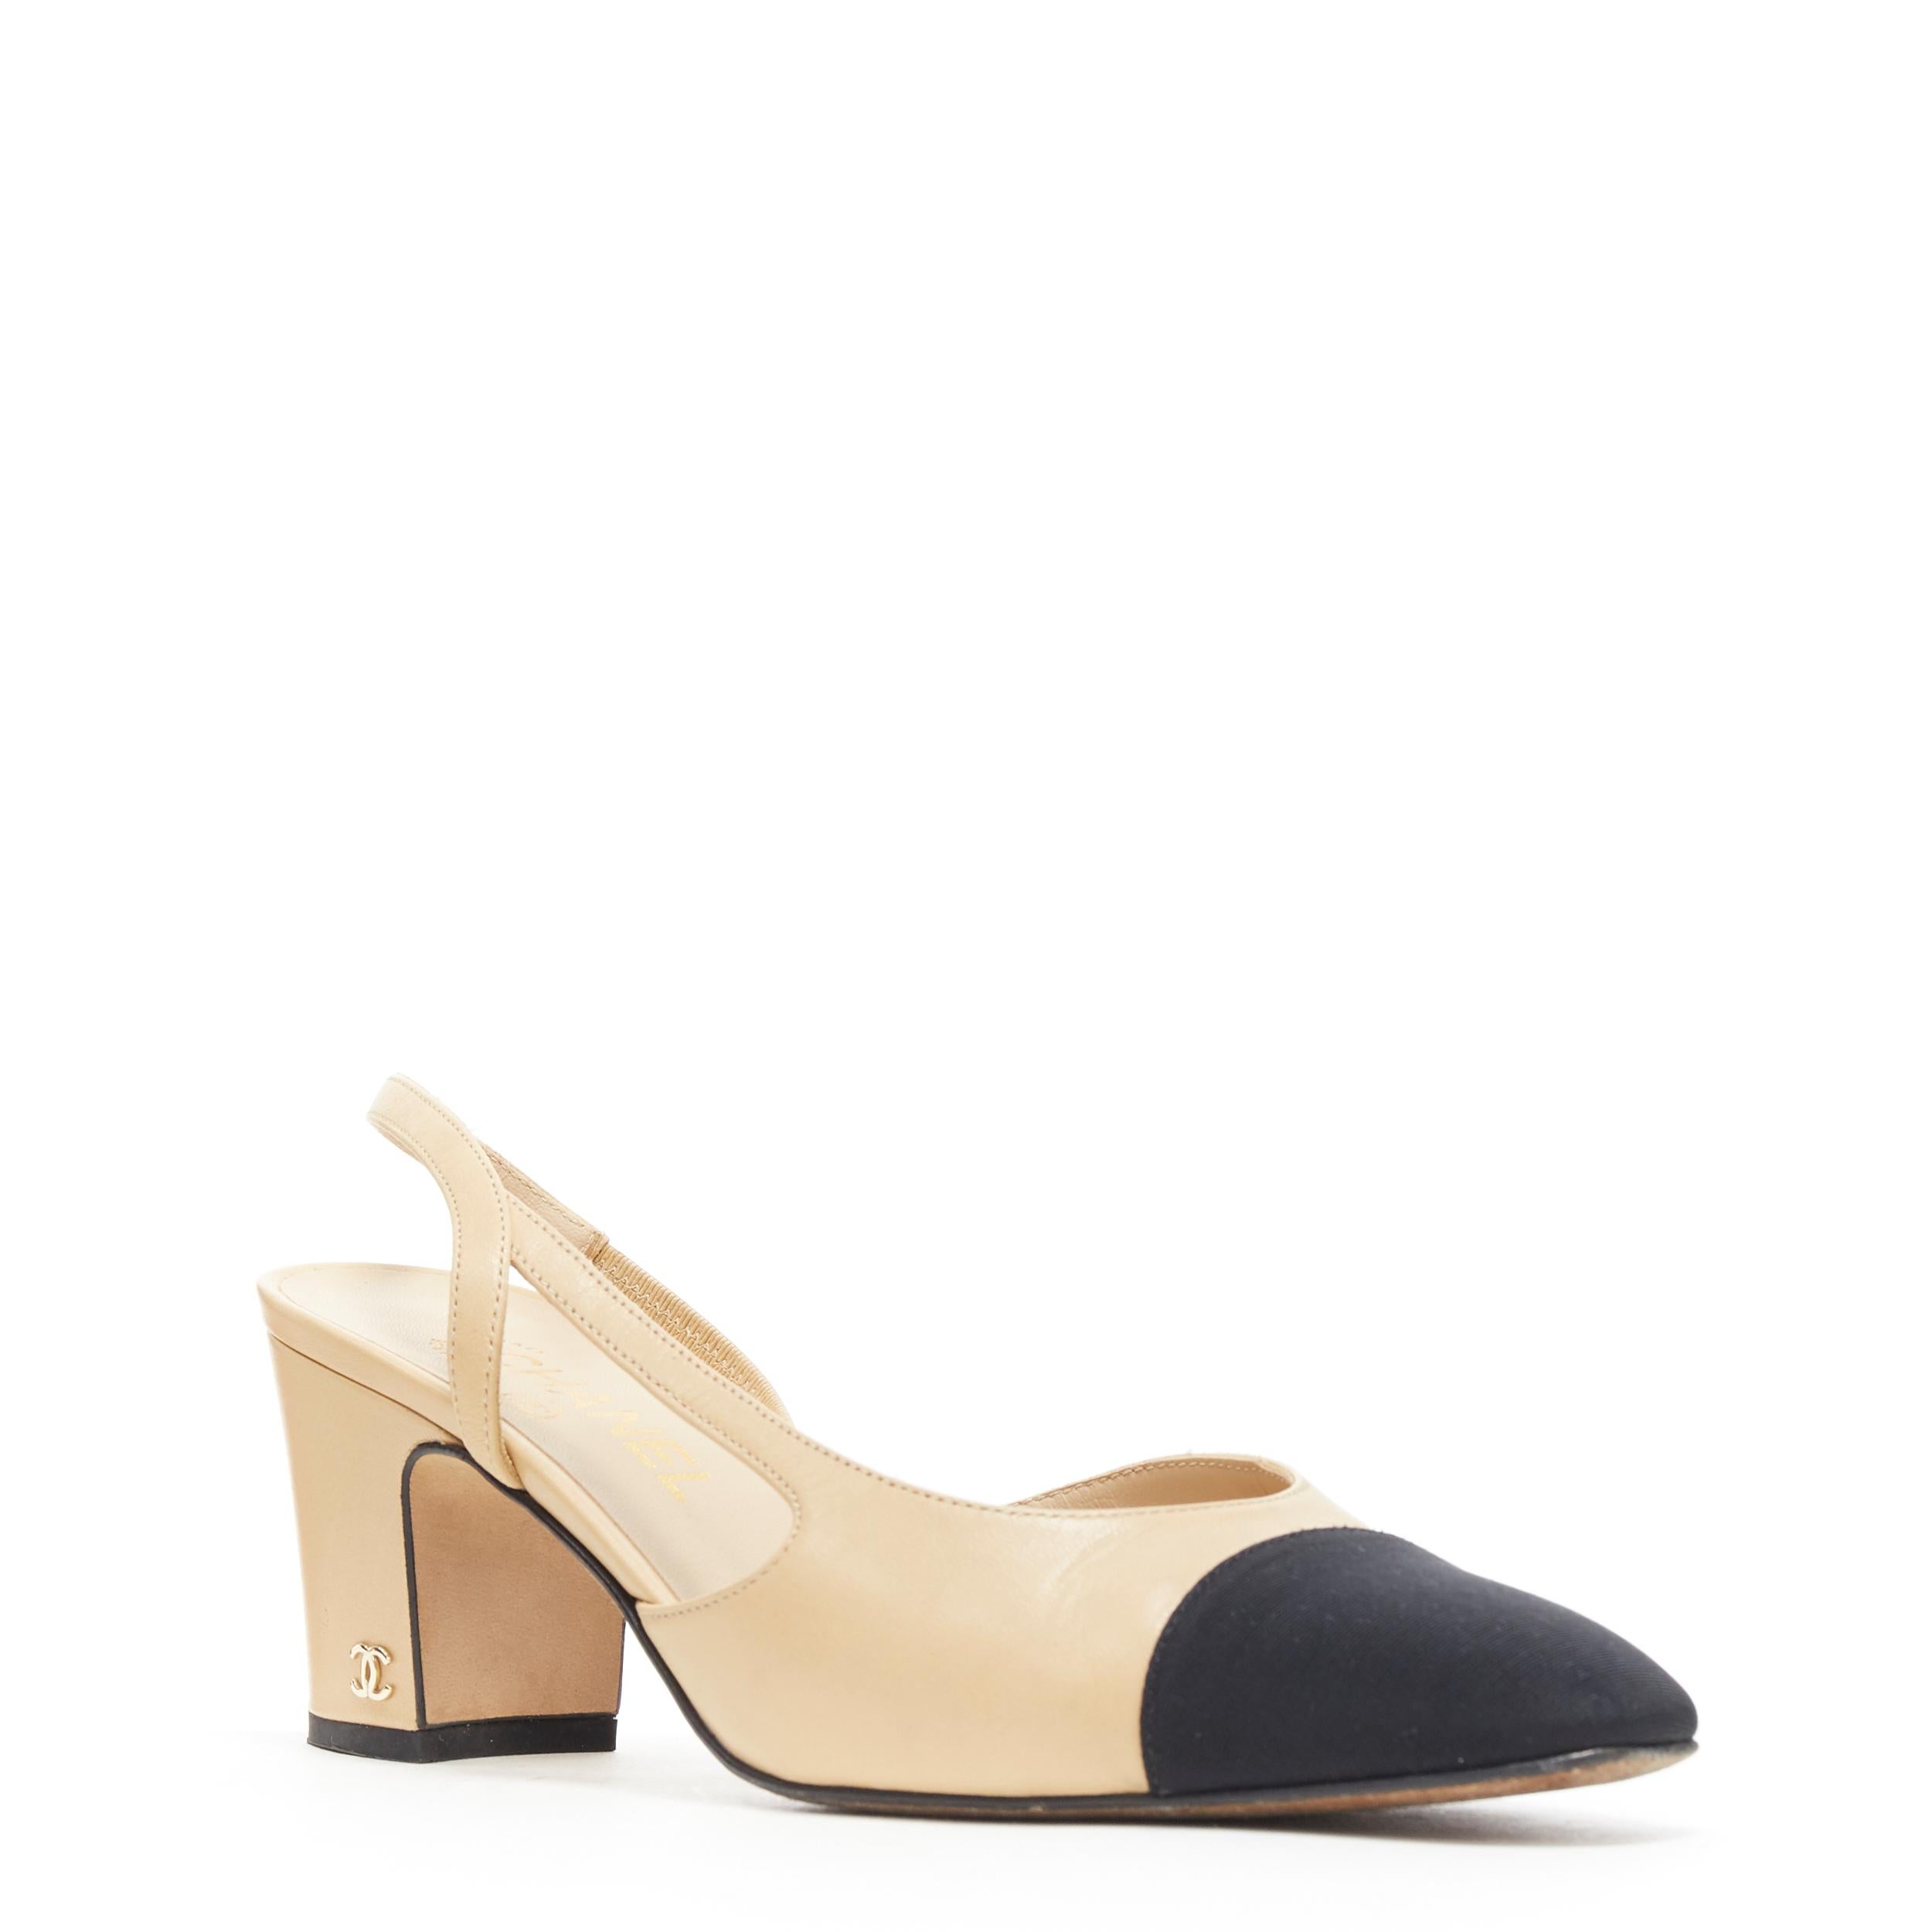 CHANEL nude leather black grosgrain toe cap CC logo block heel slingback EU39 C
Brand: Chanel
Designer: Karl Lagerfeld
Model Name / Style: Slingback pump
Material: Leather
Color: Beige
Pattern: Solid
Extra Detail: Mid (2-2.9 in) heel height. Almond